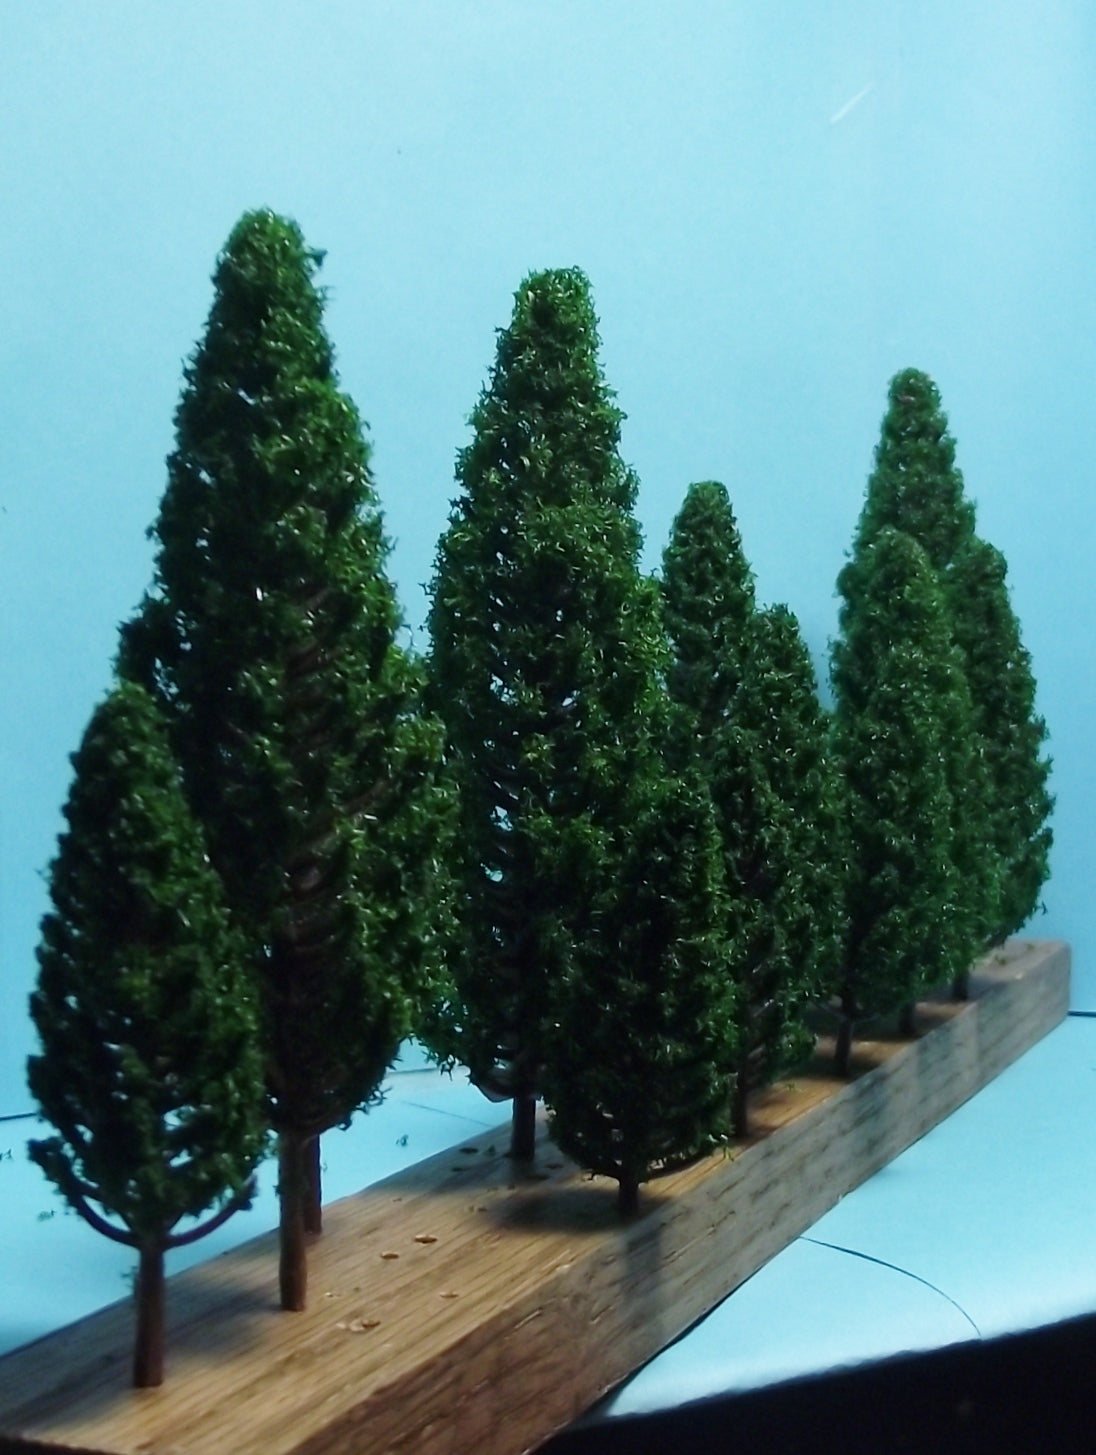 Multi Scale Authentic Scenery 16 Piece Set of Dark Green Pine Trees in 5 Sizes